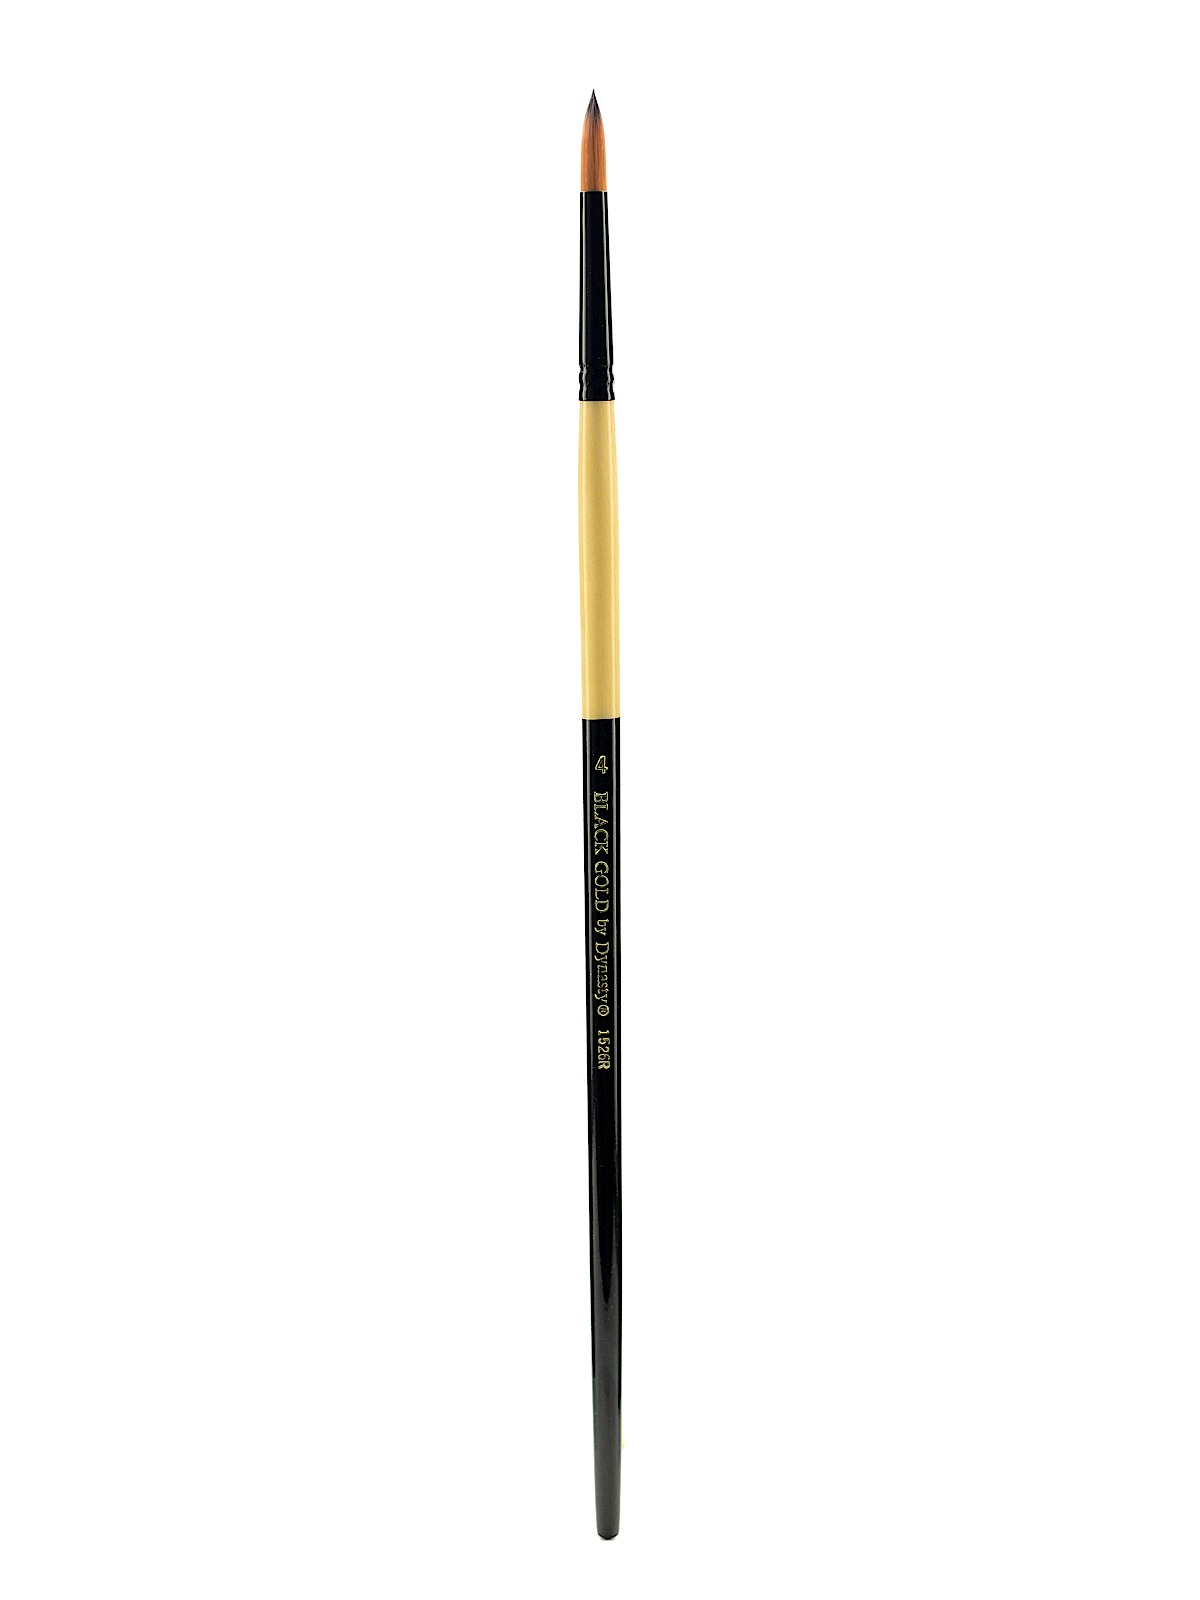 Black Gold Series Long Handled Synthetic Brushes 4 Round 1526r